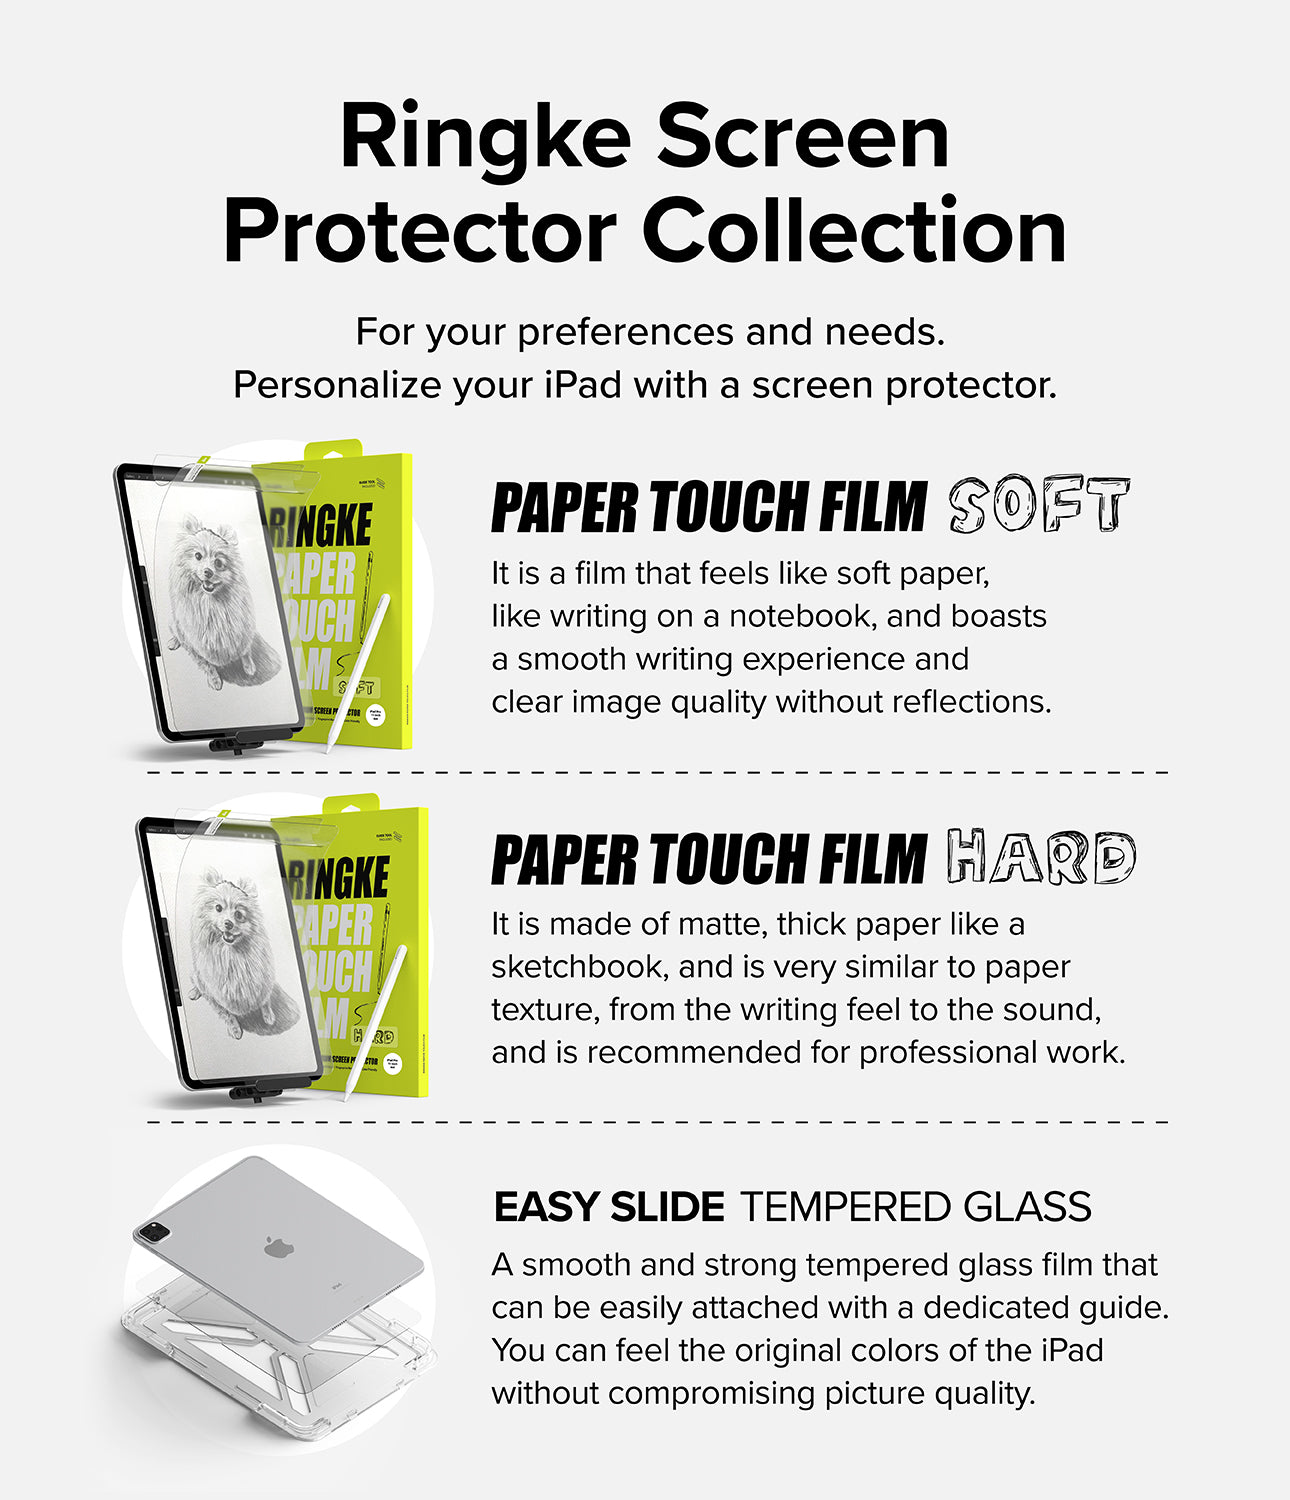 iPad Pro 11" (M4) Screen Protector | Paper Touch Film - Ringke Screen Protector Collection. For your preferences and needs. Personalize your iPad with a screen protector.